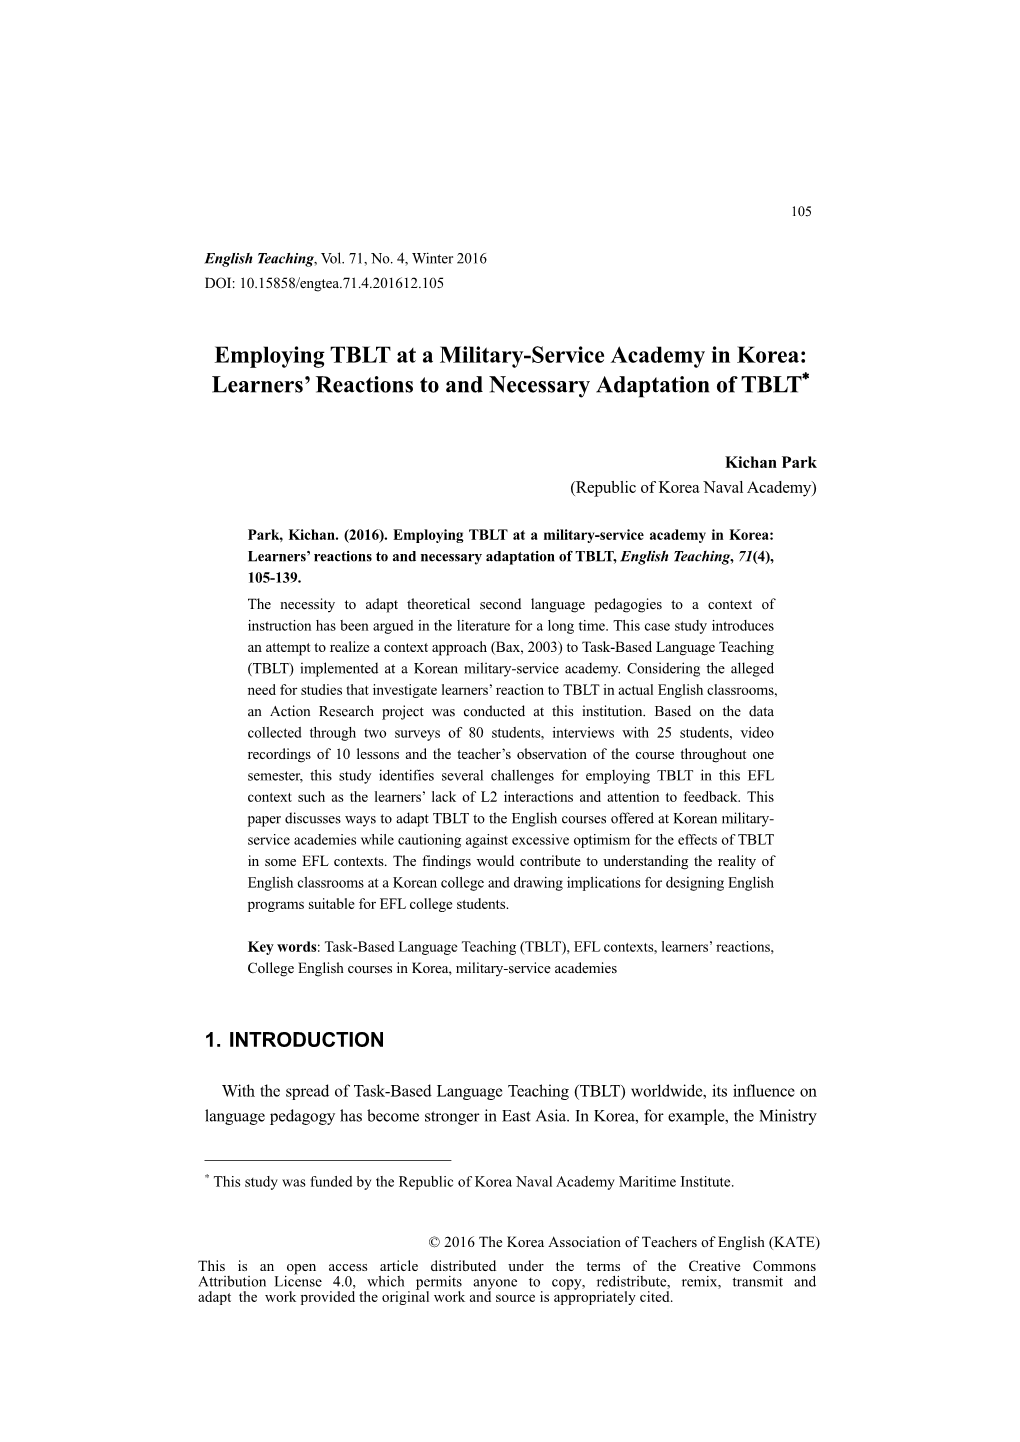 Employing TBLT at a Military-Service Academy in Korea: Learners' Reactions to and Necessary Adaptation of TBLT